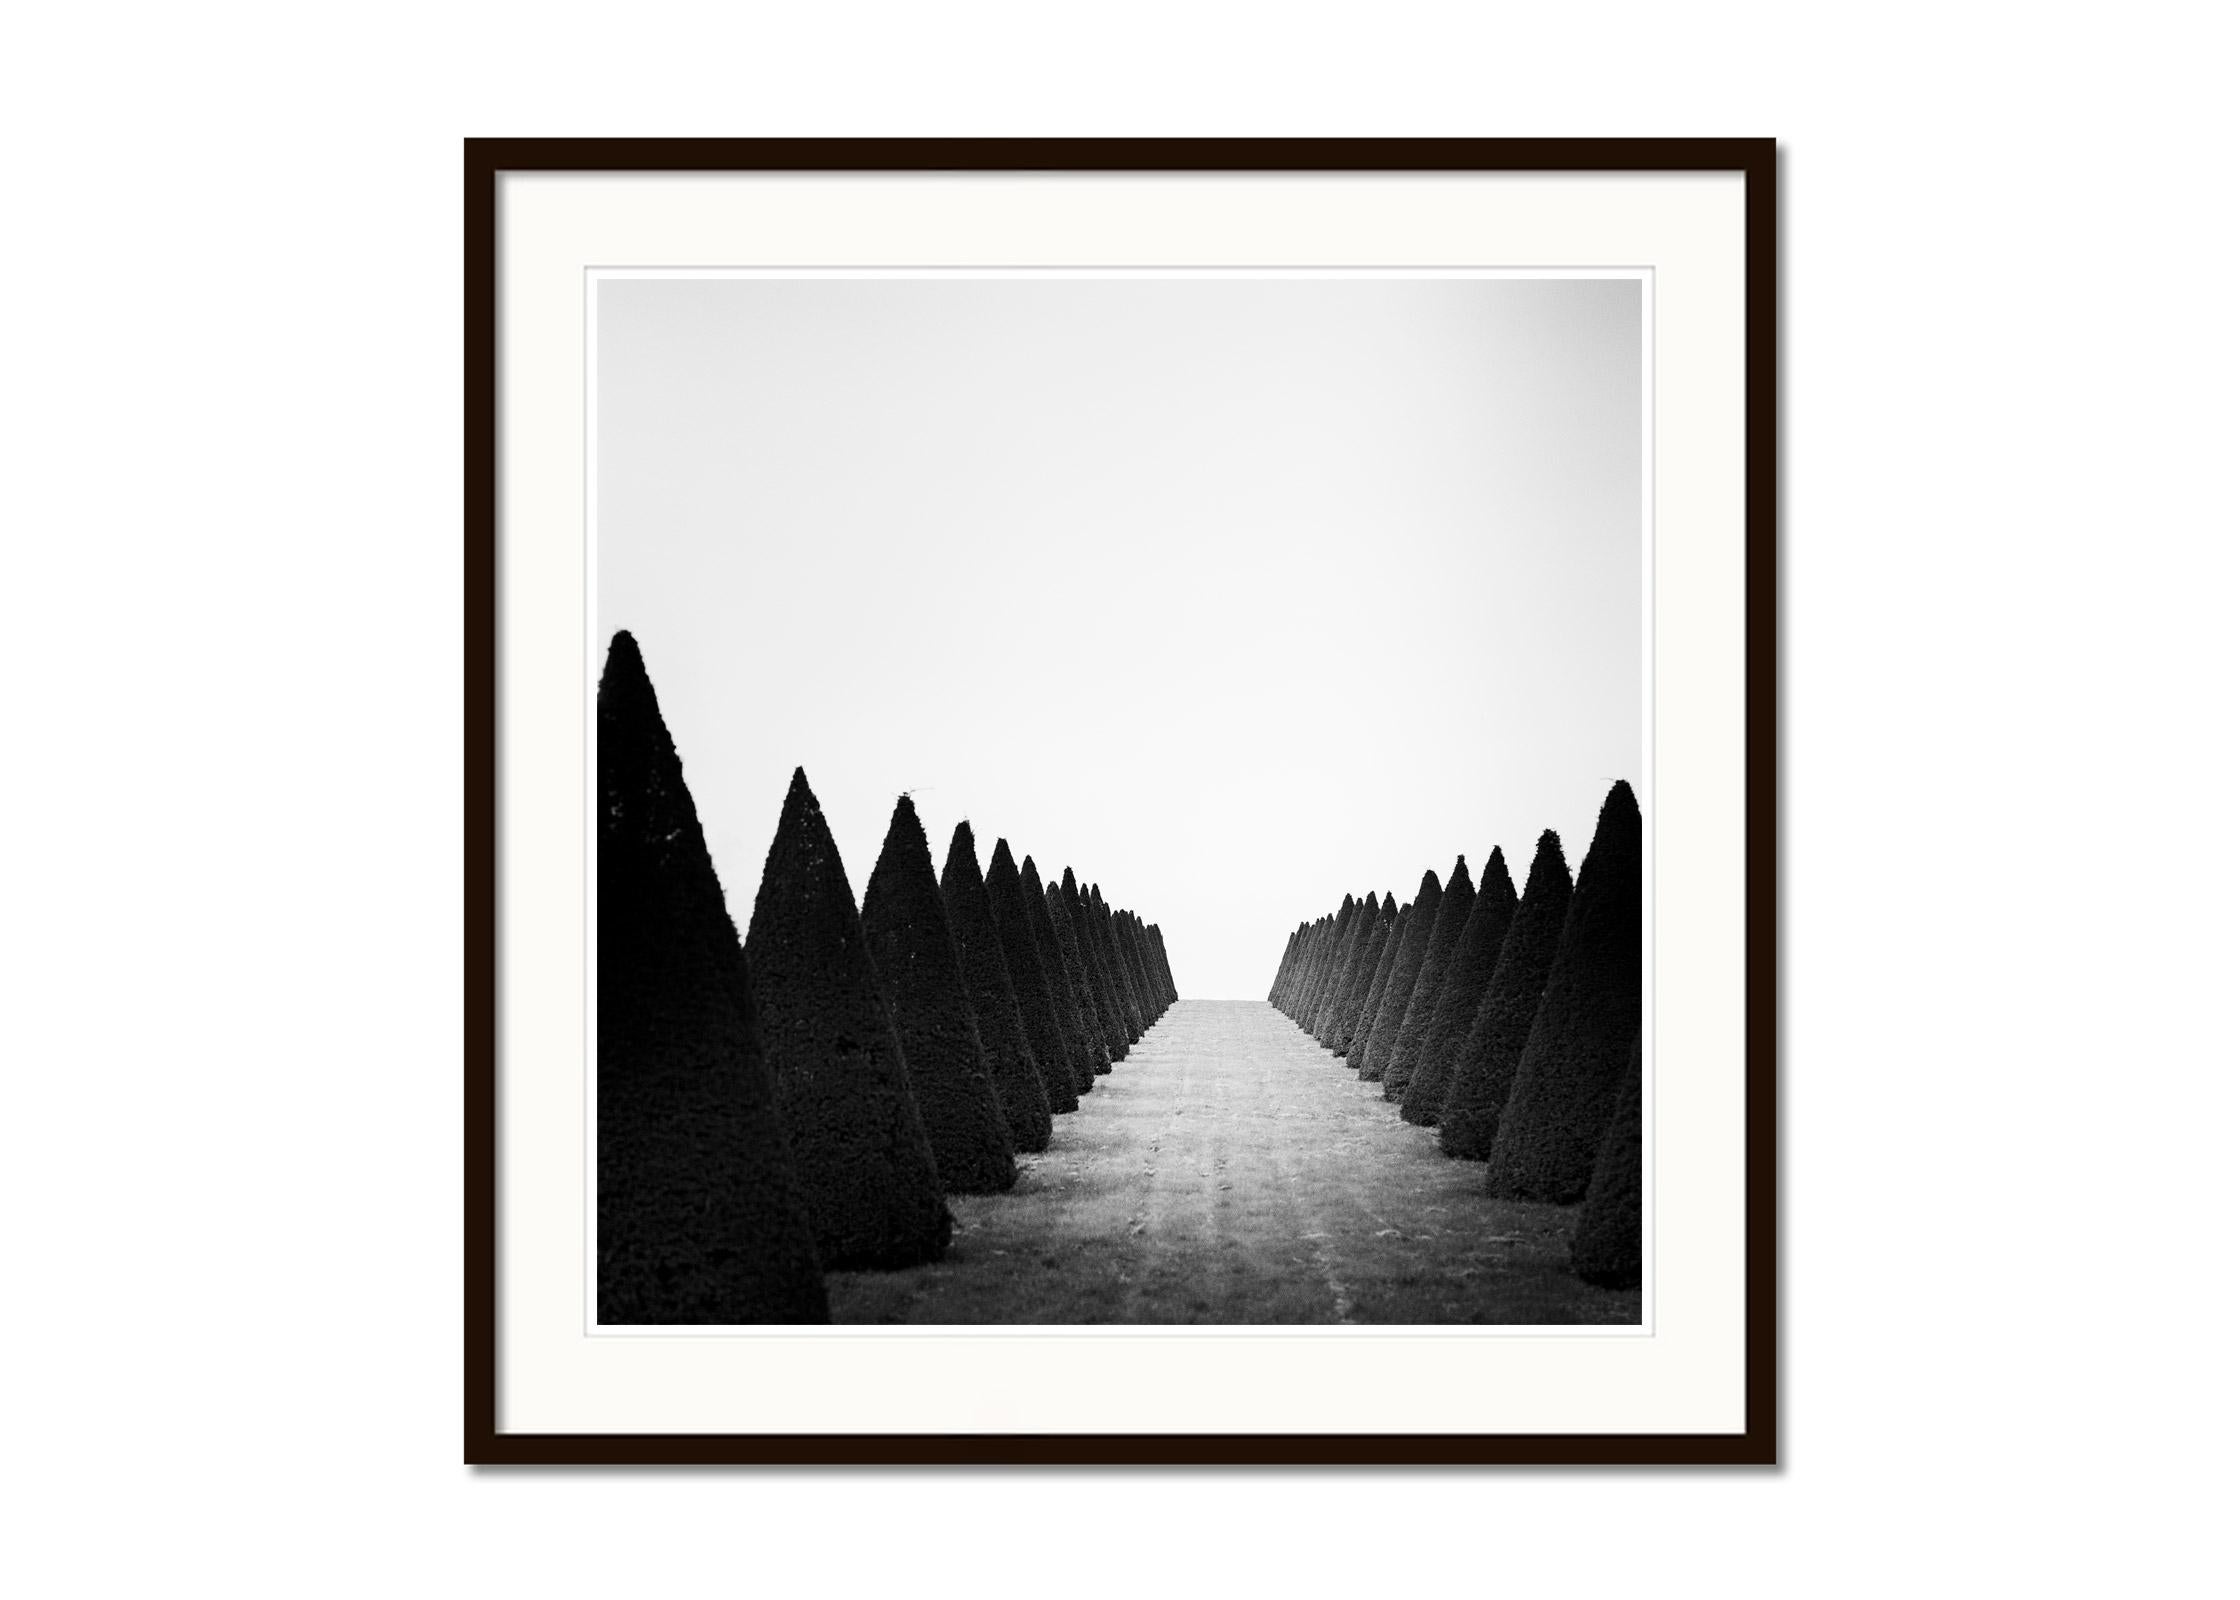 Hedges, Palace of Versailles, Paris, black and white photography, landscape - Gray Landscape Photograph by Gerald Berghammer